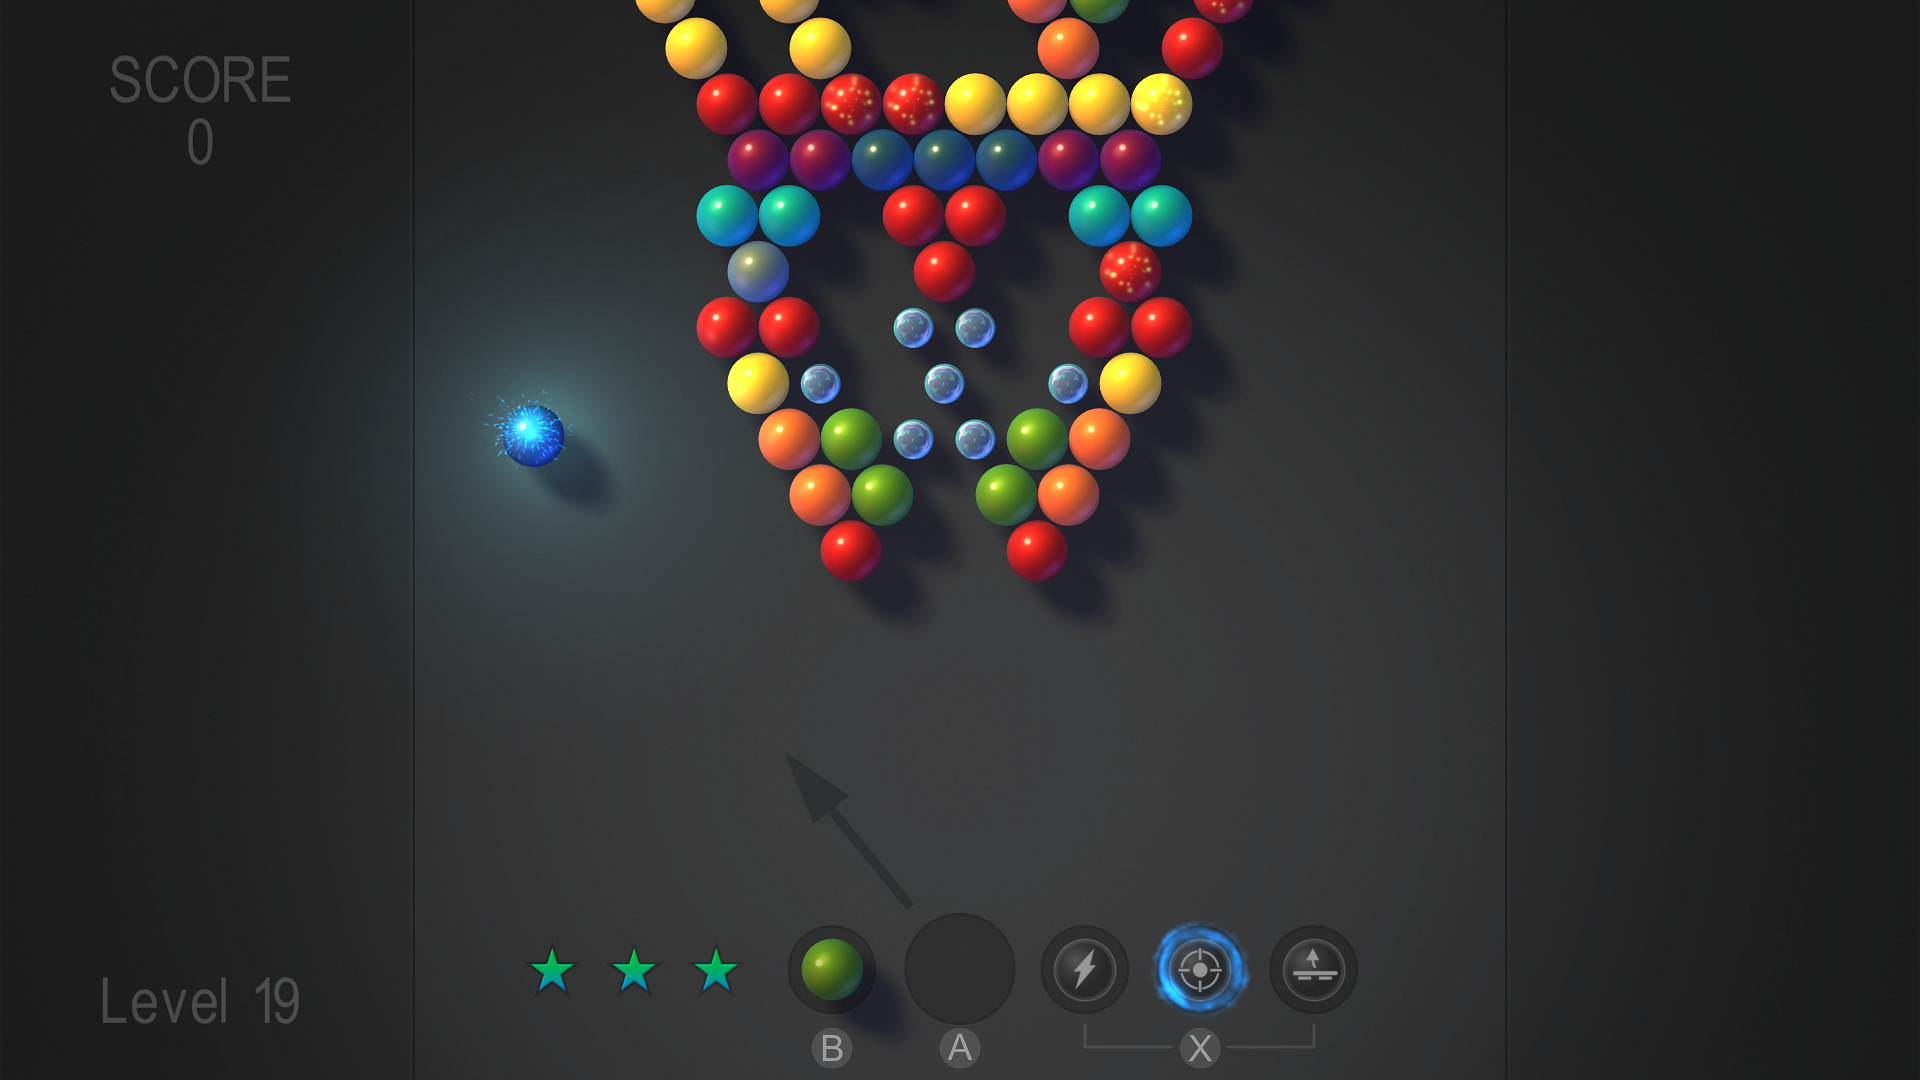 Download Bubble Shooter App for PC / Windows / Computer